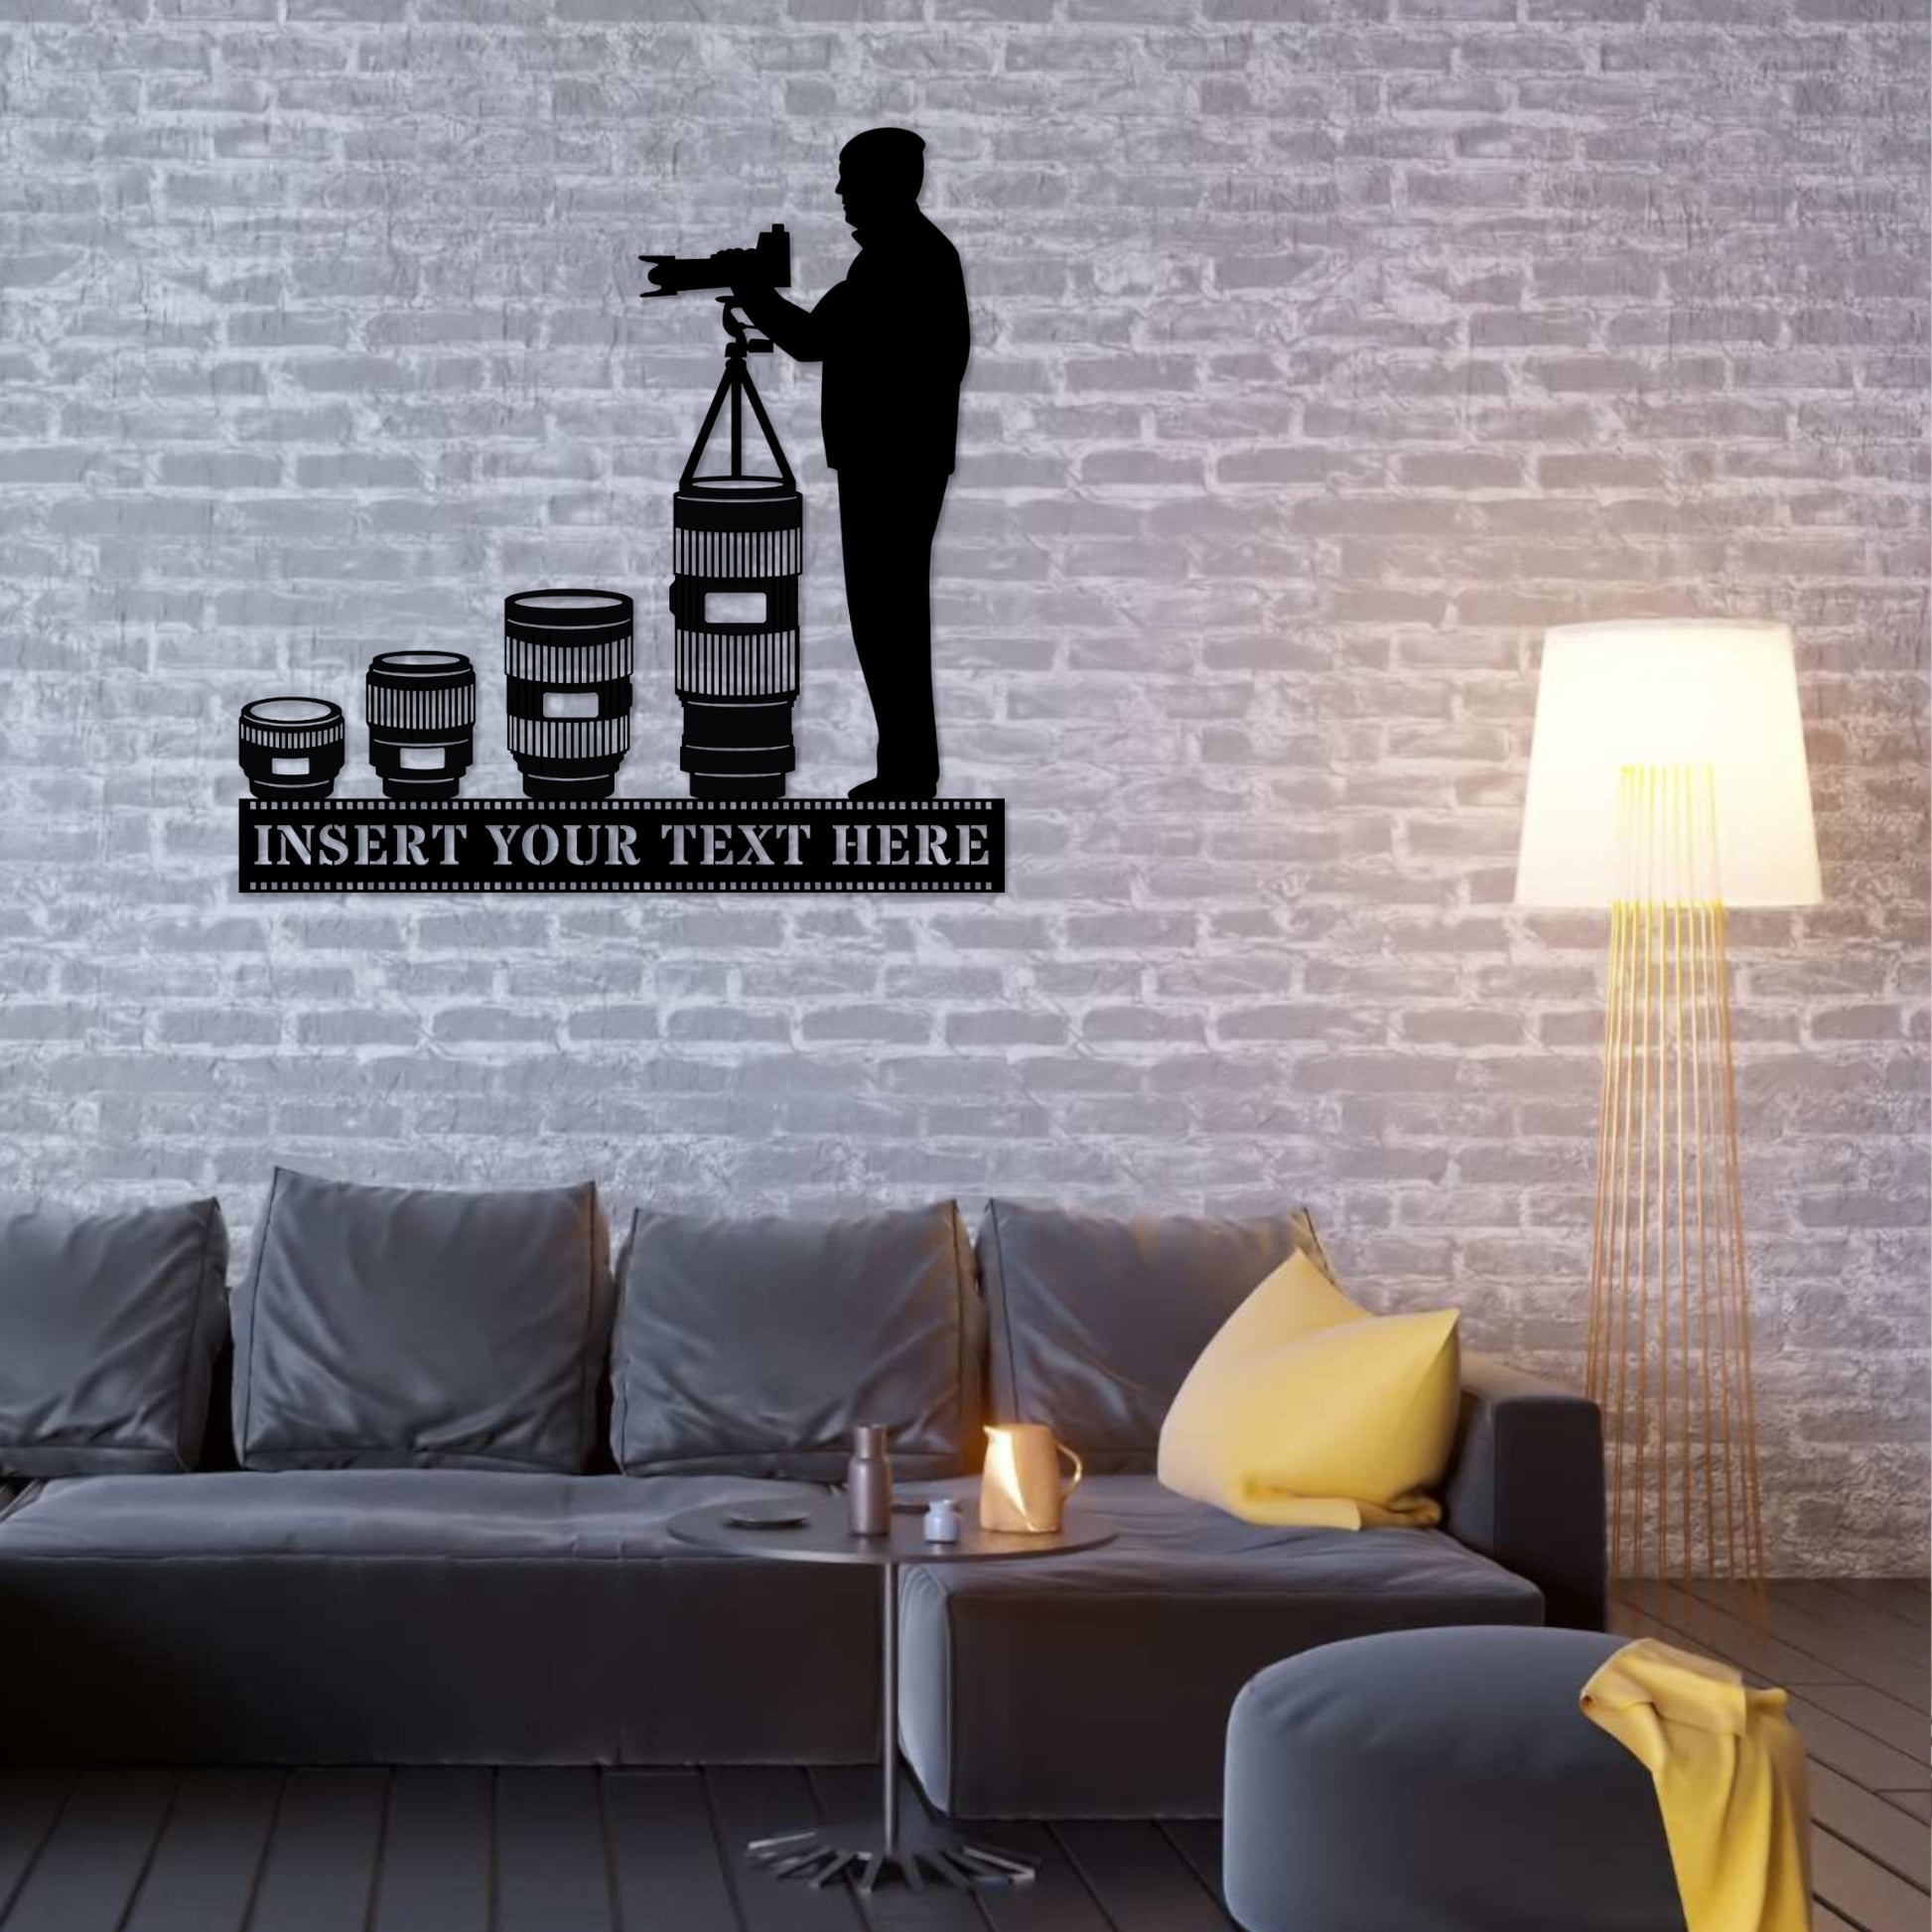 Personalized Cameraman Name Metal Sign. Custom Photographer Wall Art Decor Gift. Photography Enthusiast Wall Hanging. Photo Lover Decoration